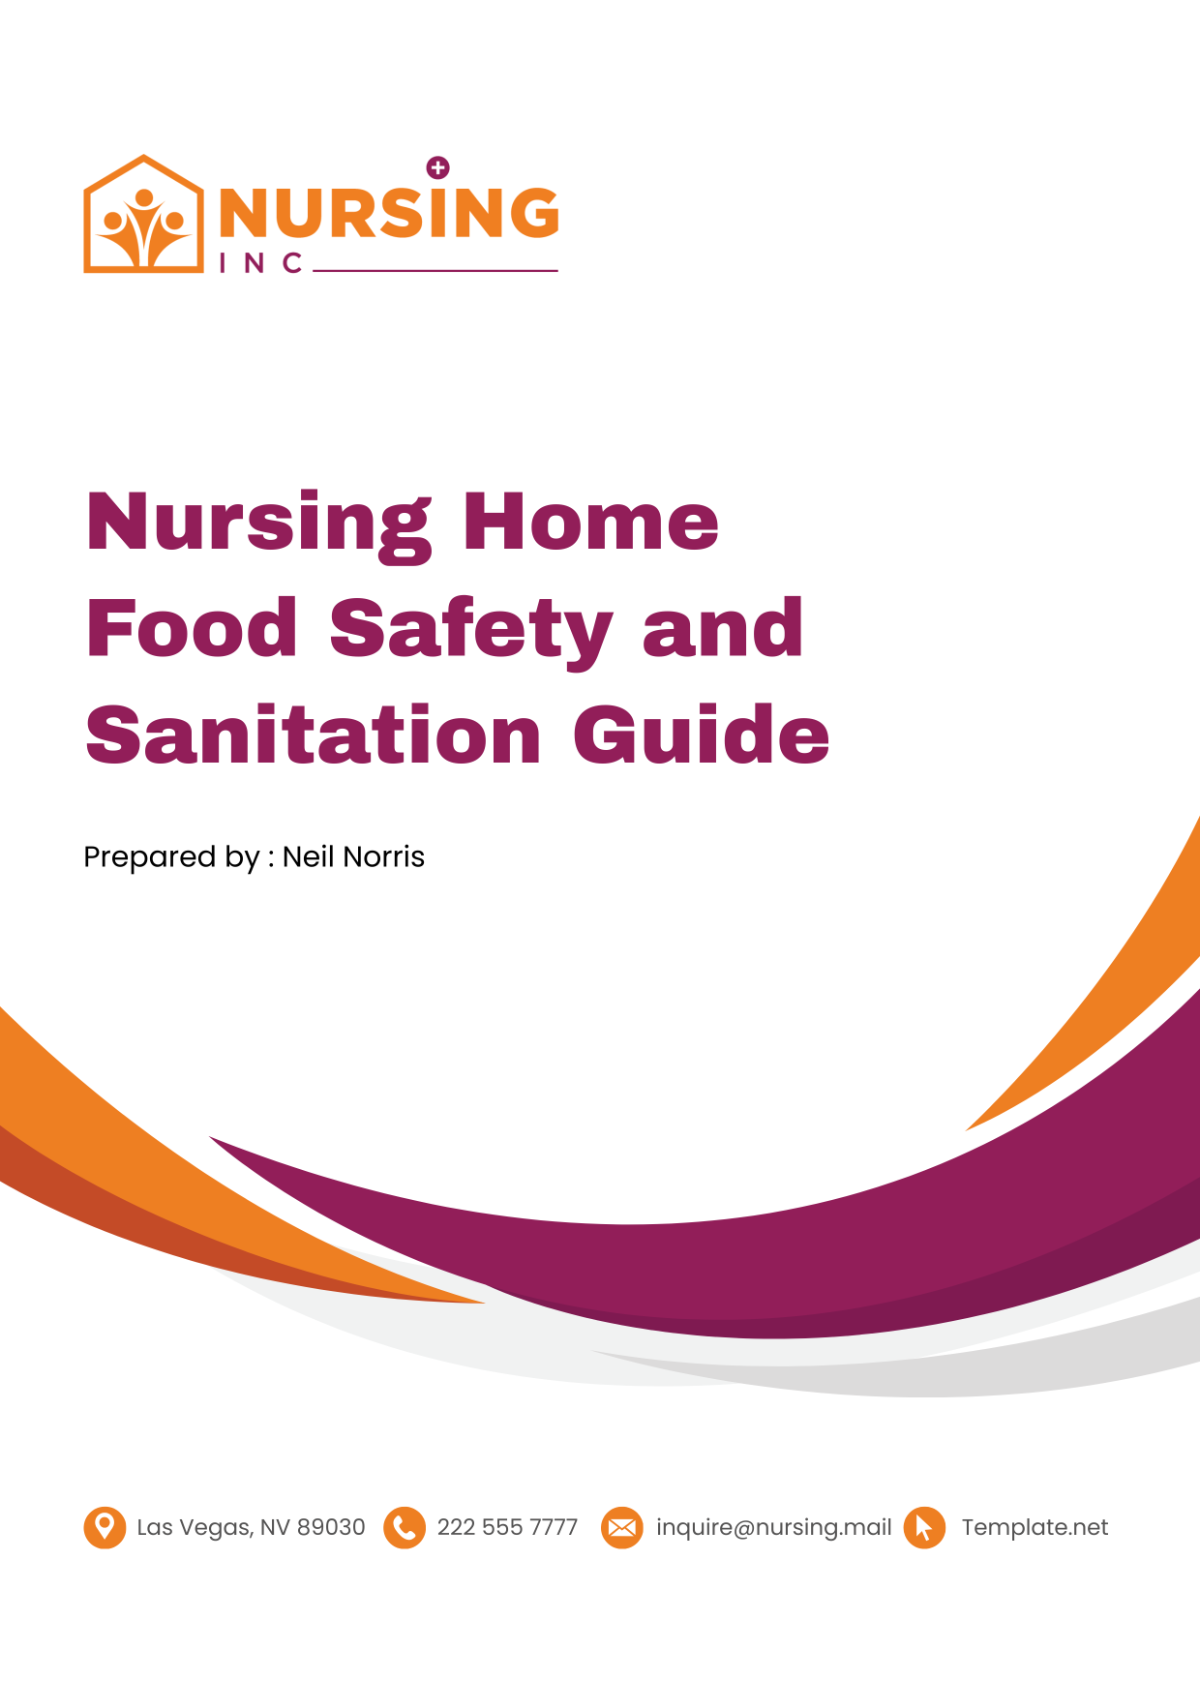 Free Nursing Home Food Safety and Sanitation Guide Template